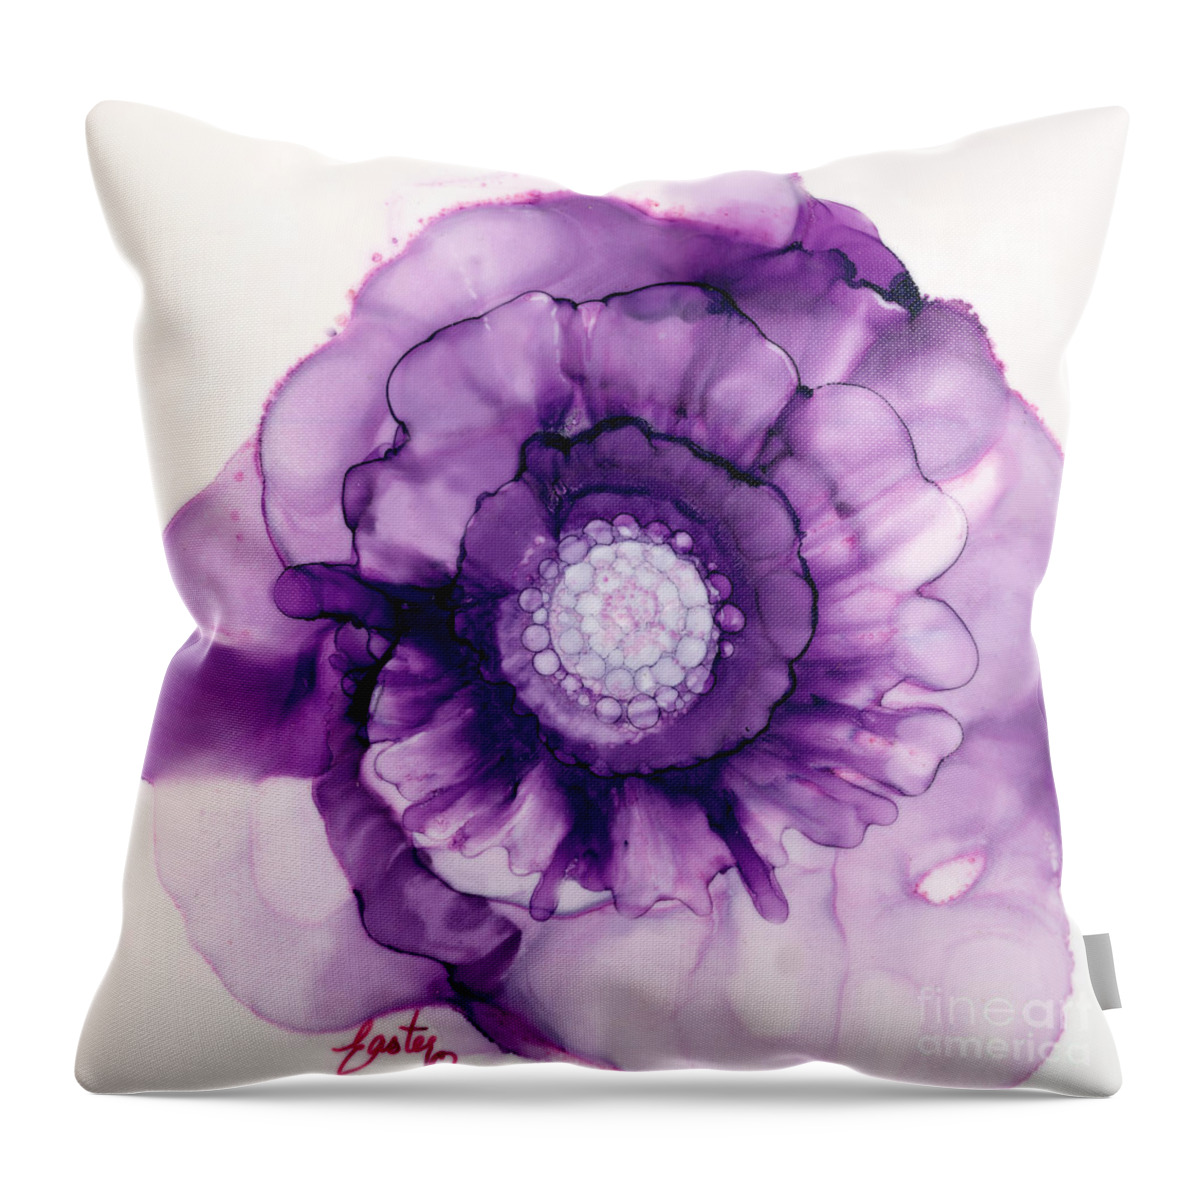 Purple Passion Flower Throw Pillow featuring the painting Purple Passion Flower by Daniela Easter